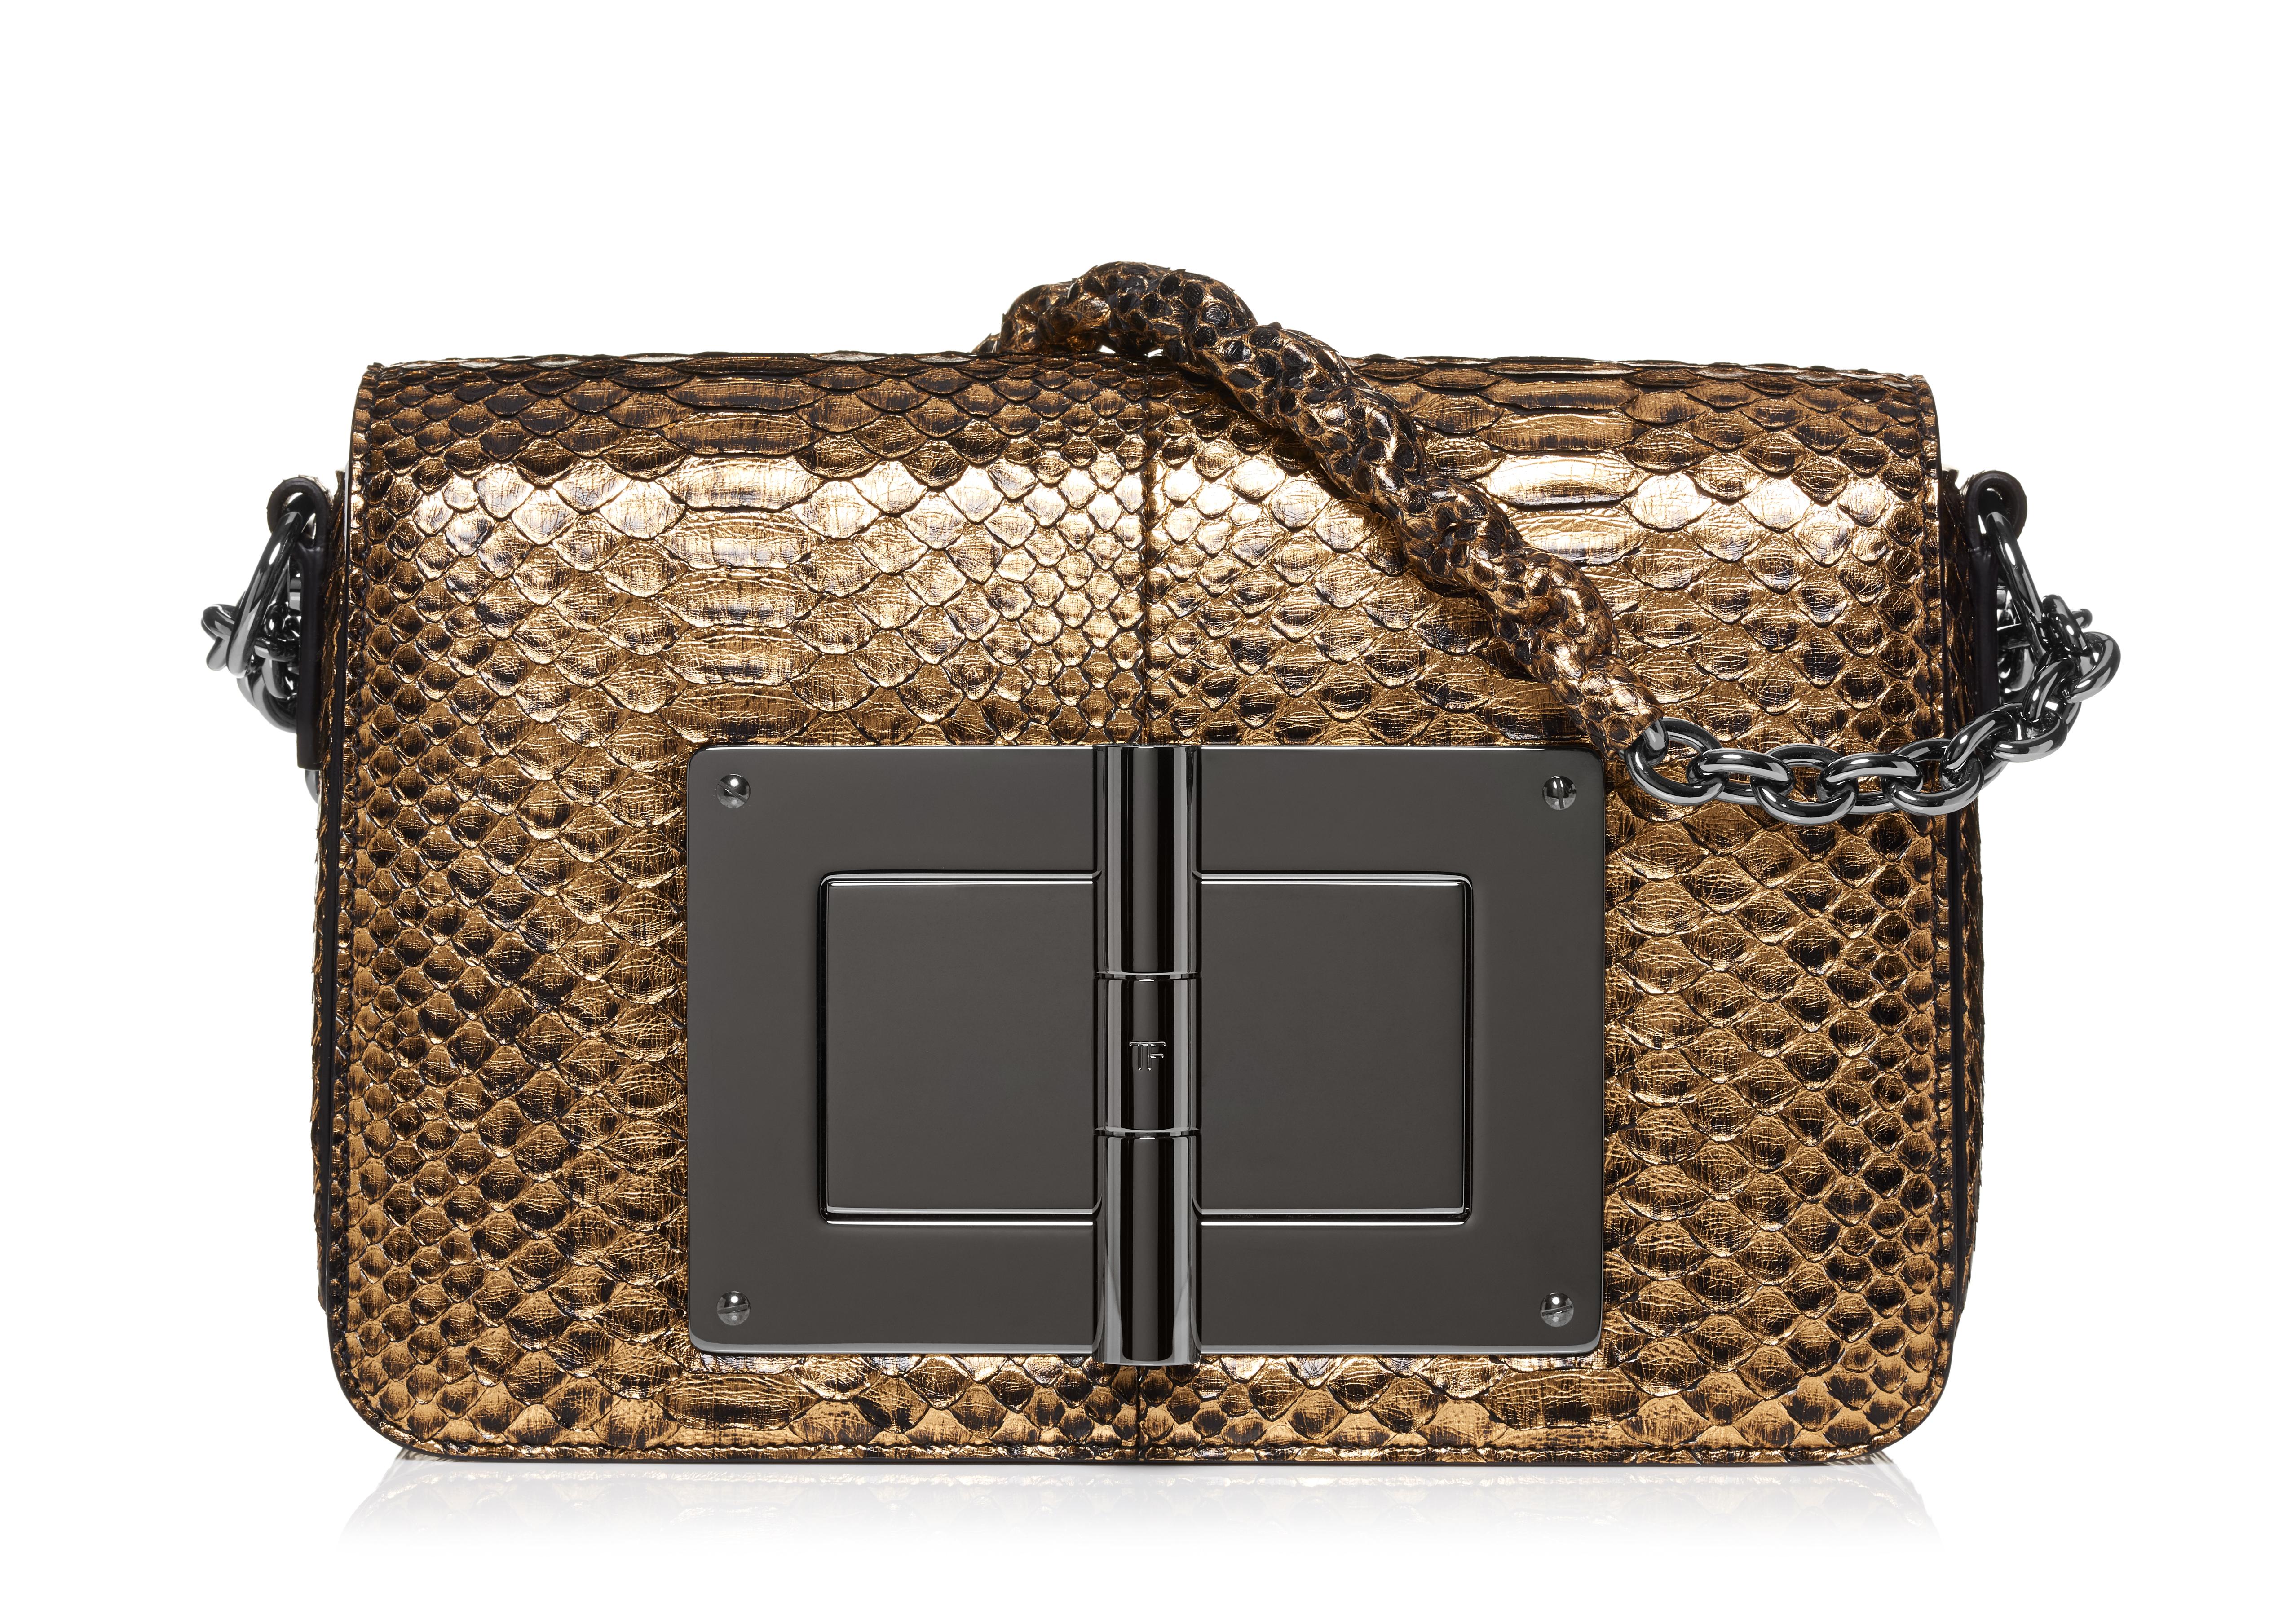 Tom Ford - Natalia bags in python and leather 2015 fall ❤️